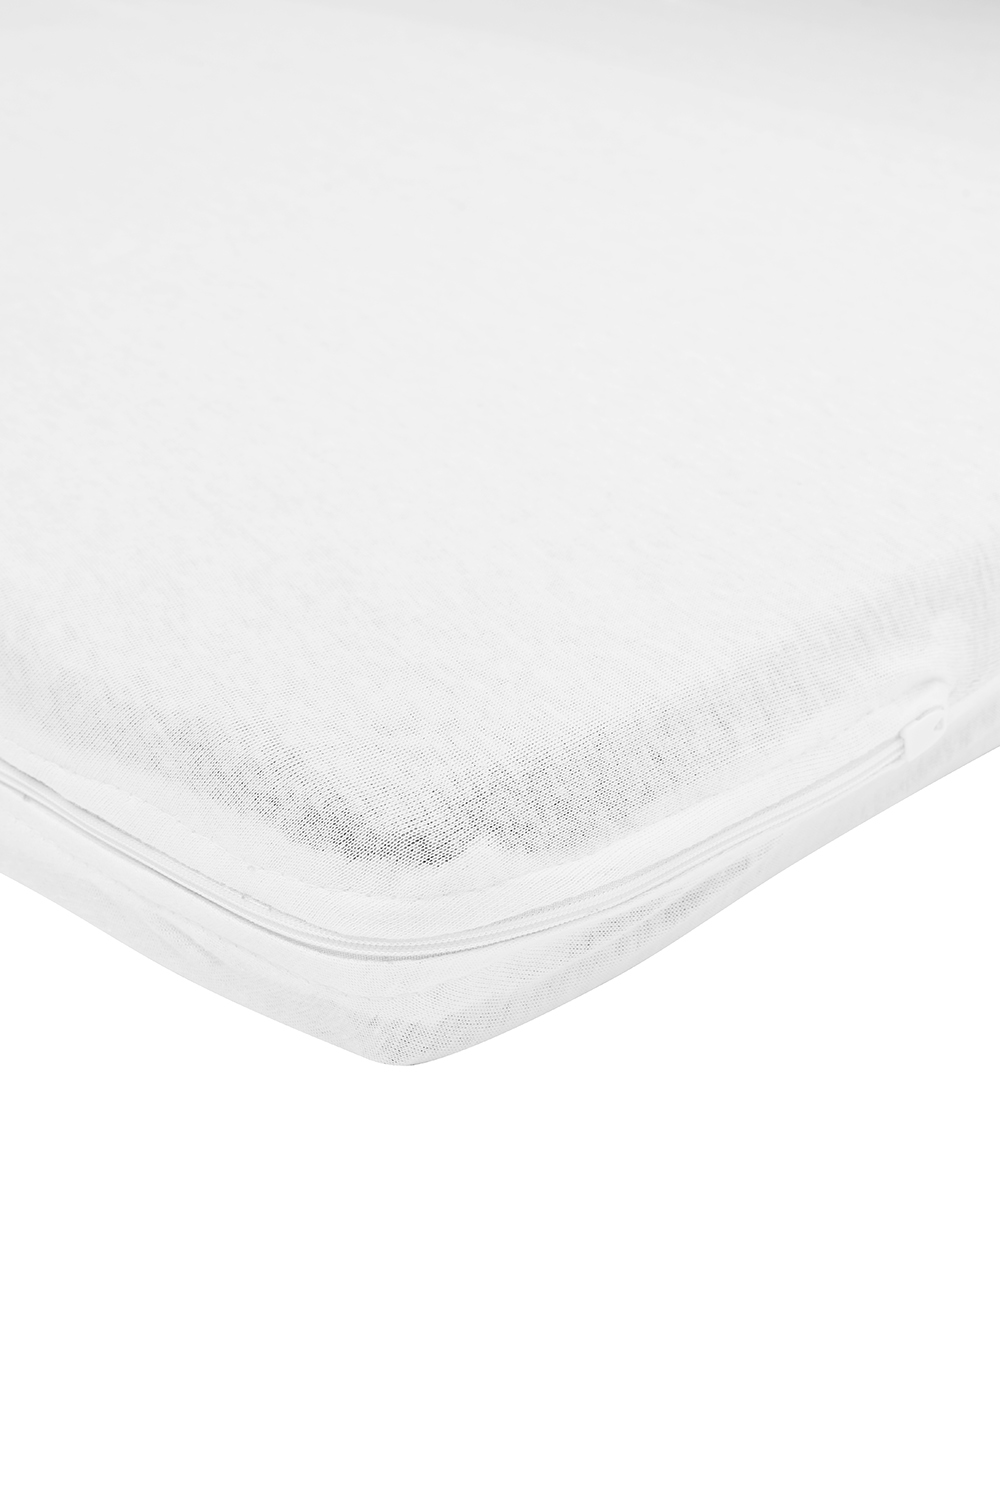 Camping bed mattress cover Uni - white - 60x120cm